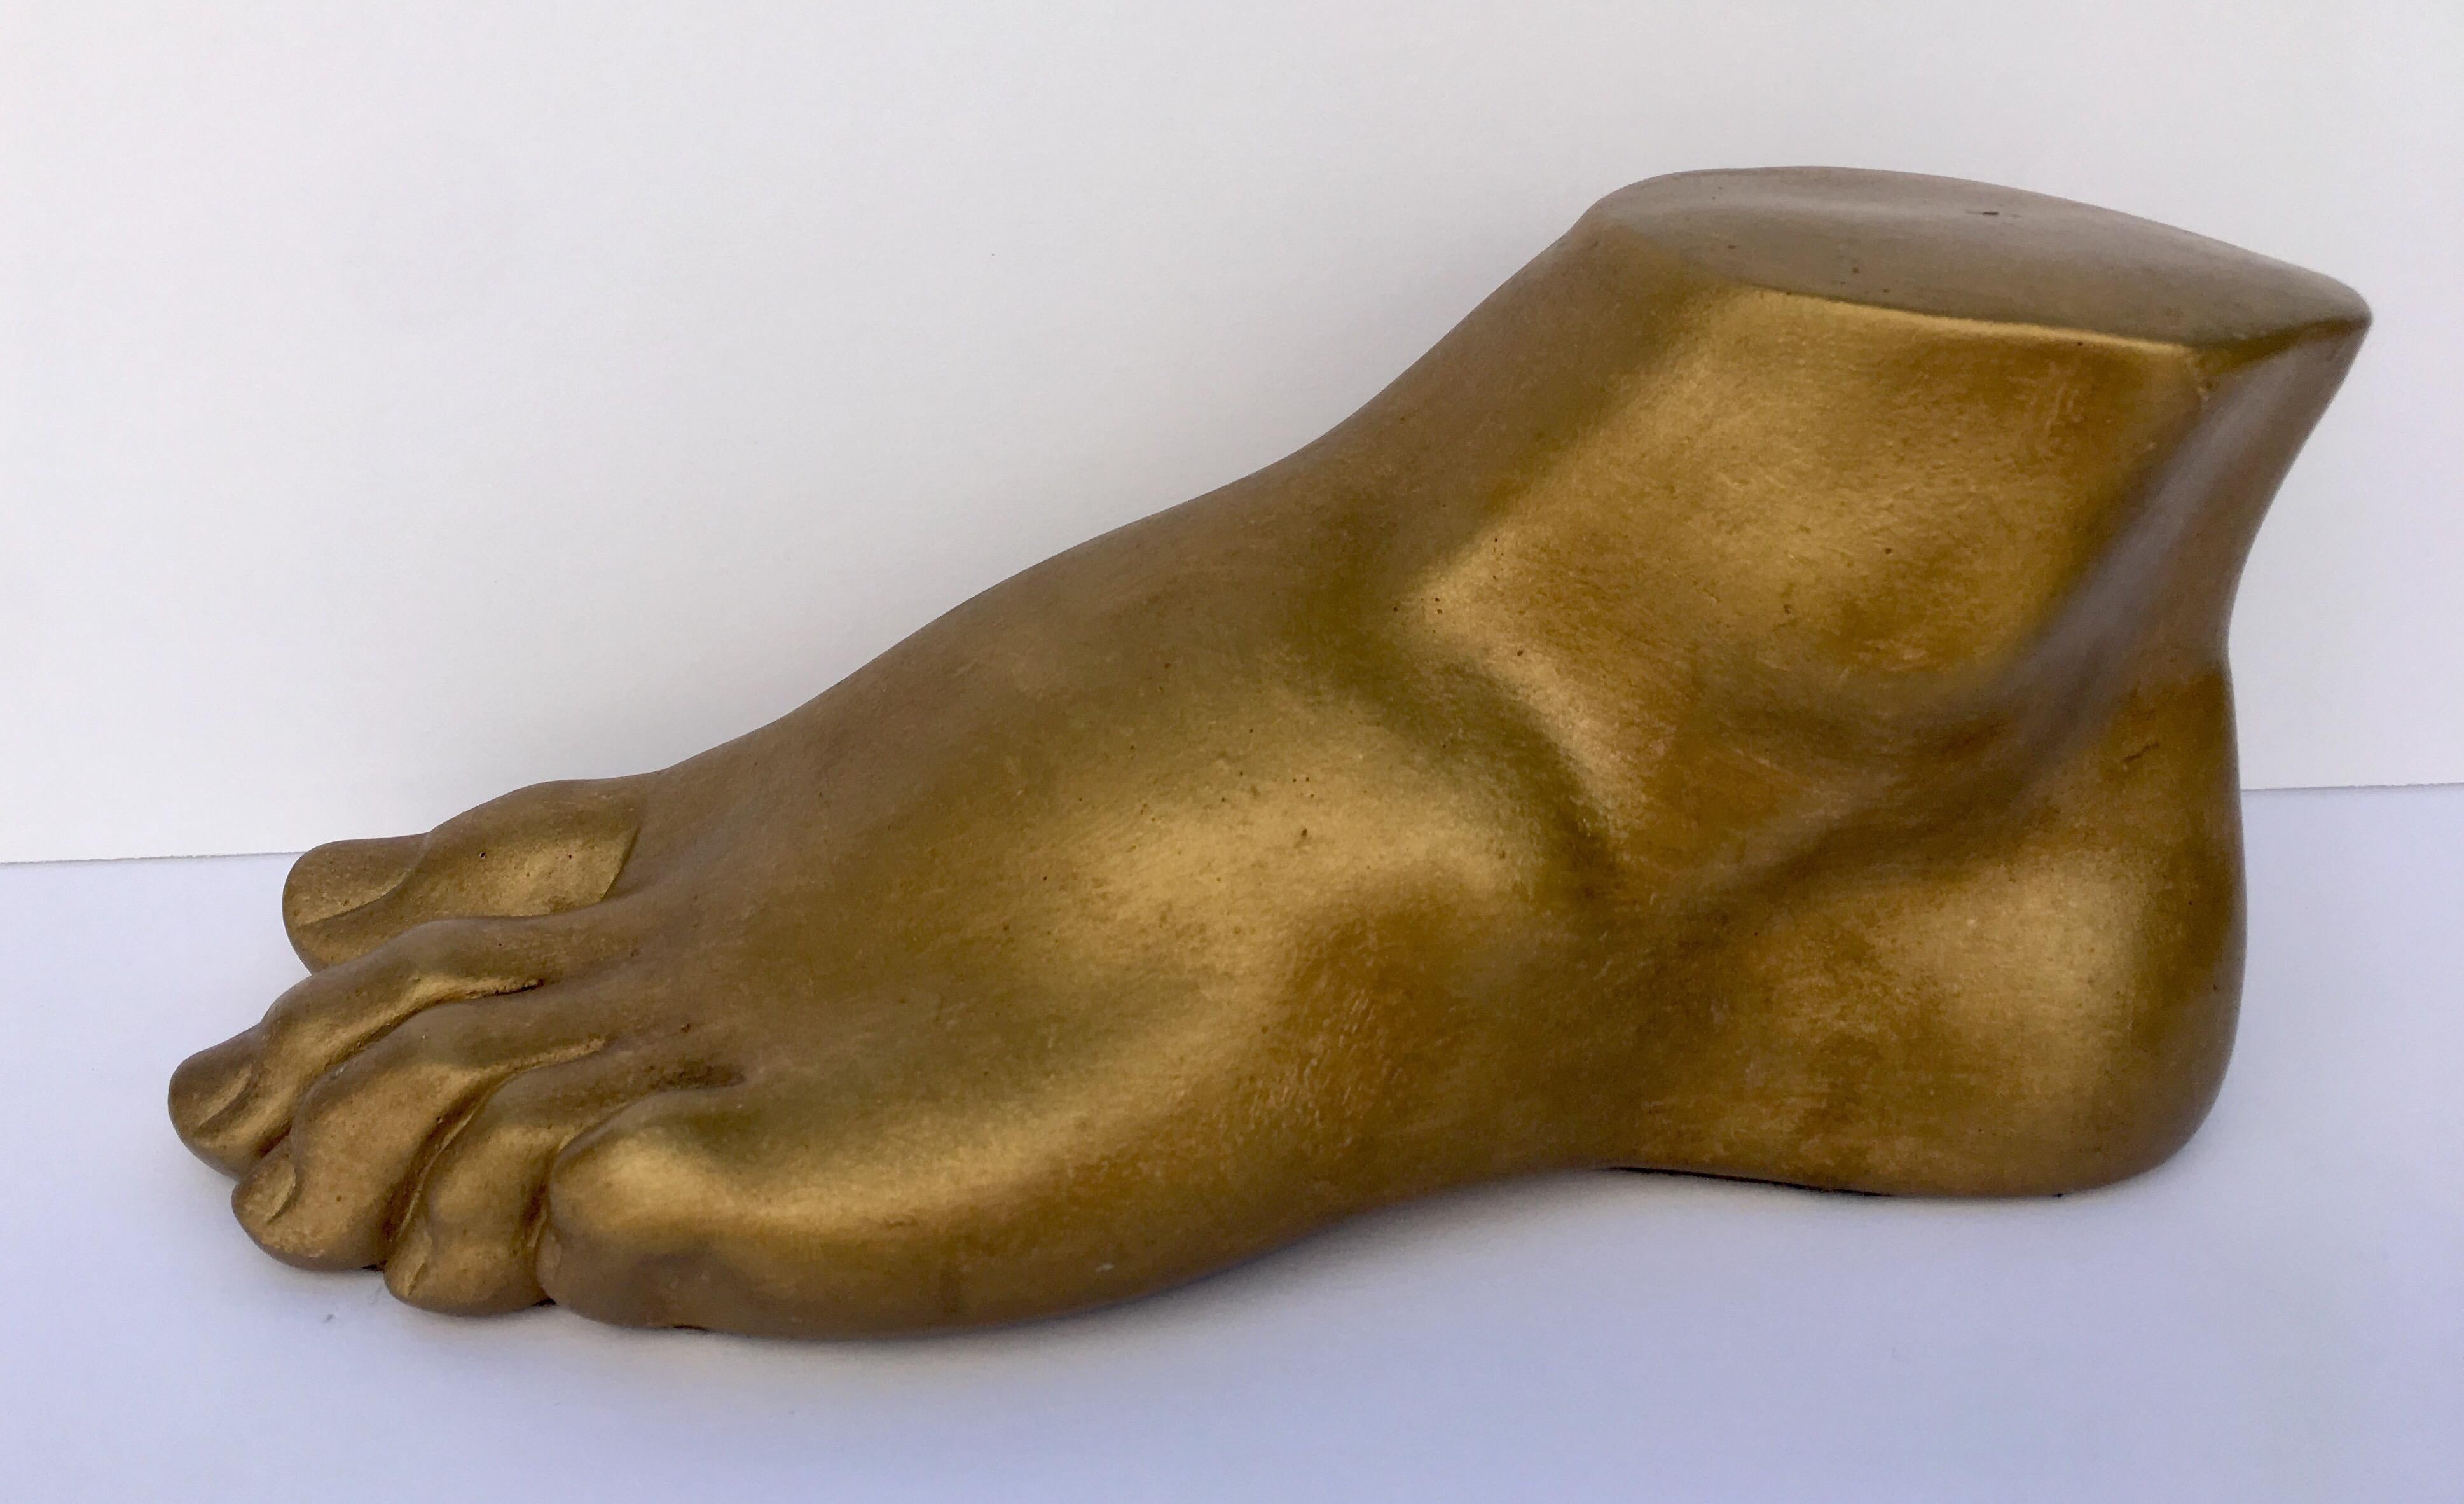 Neoclassical style plaster cast foot fragment sculpture featuring a patinated gold metallic finish. An interesting tabletop accessory for any Hollywood Regency interior.